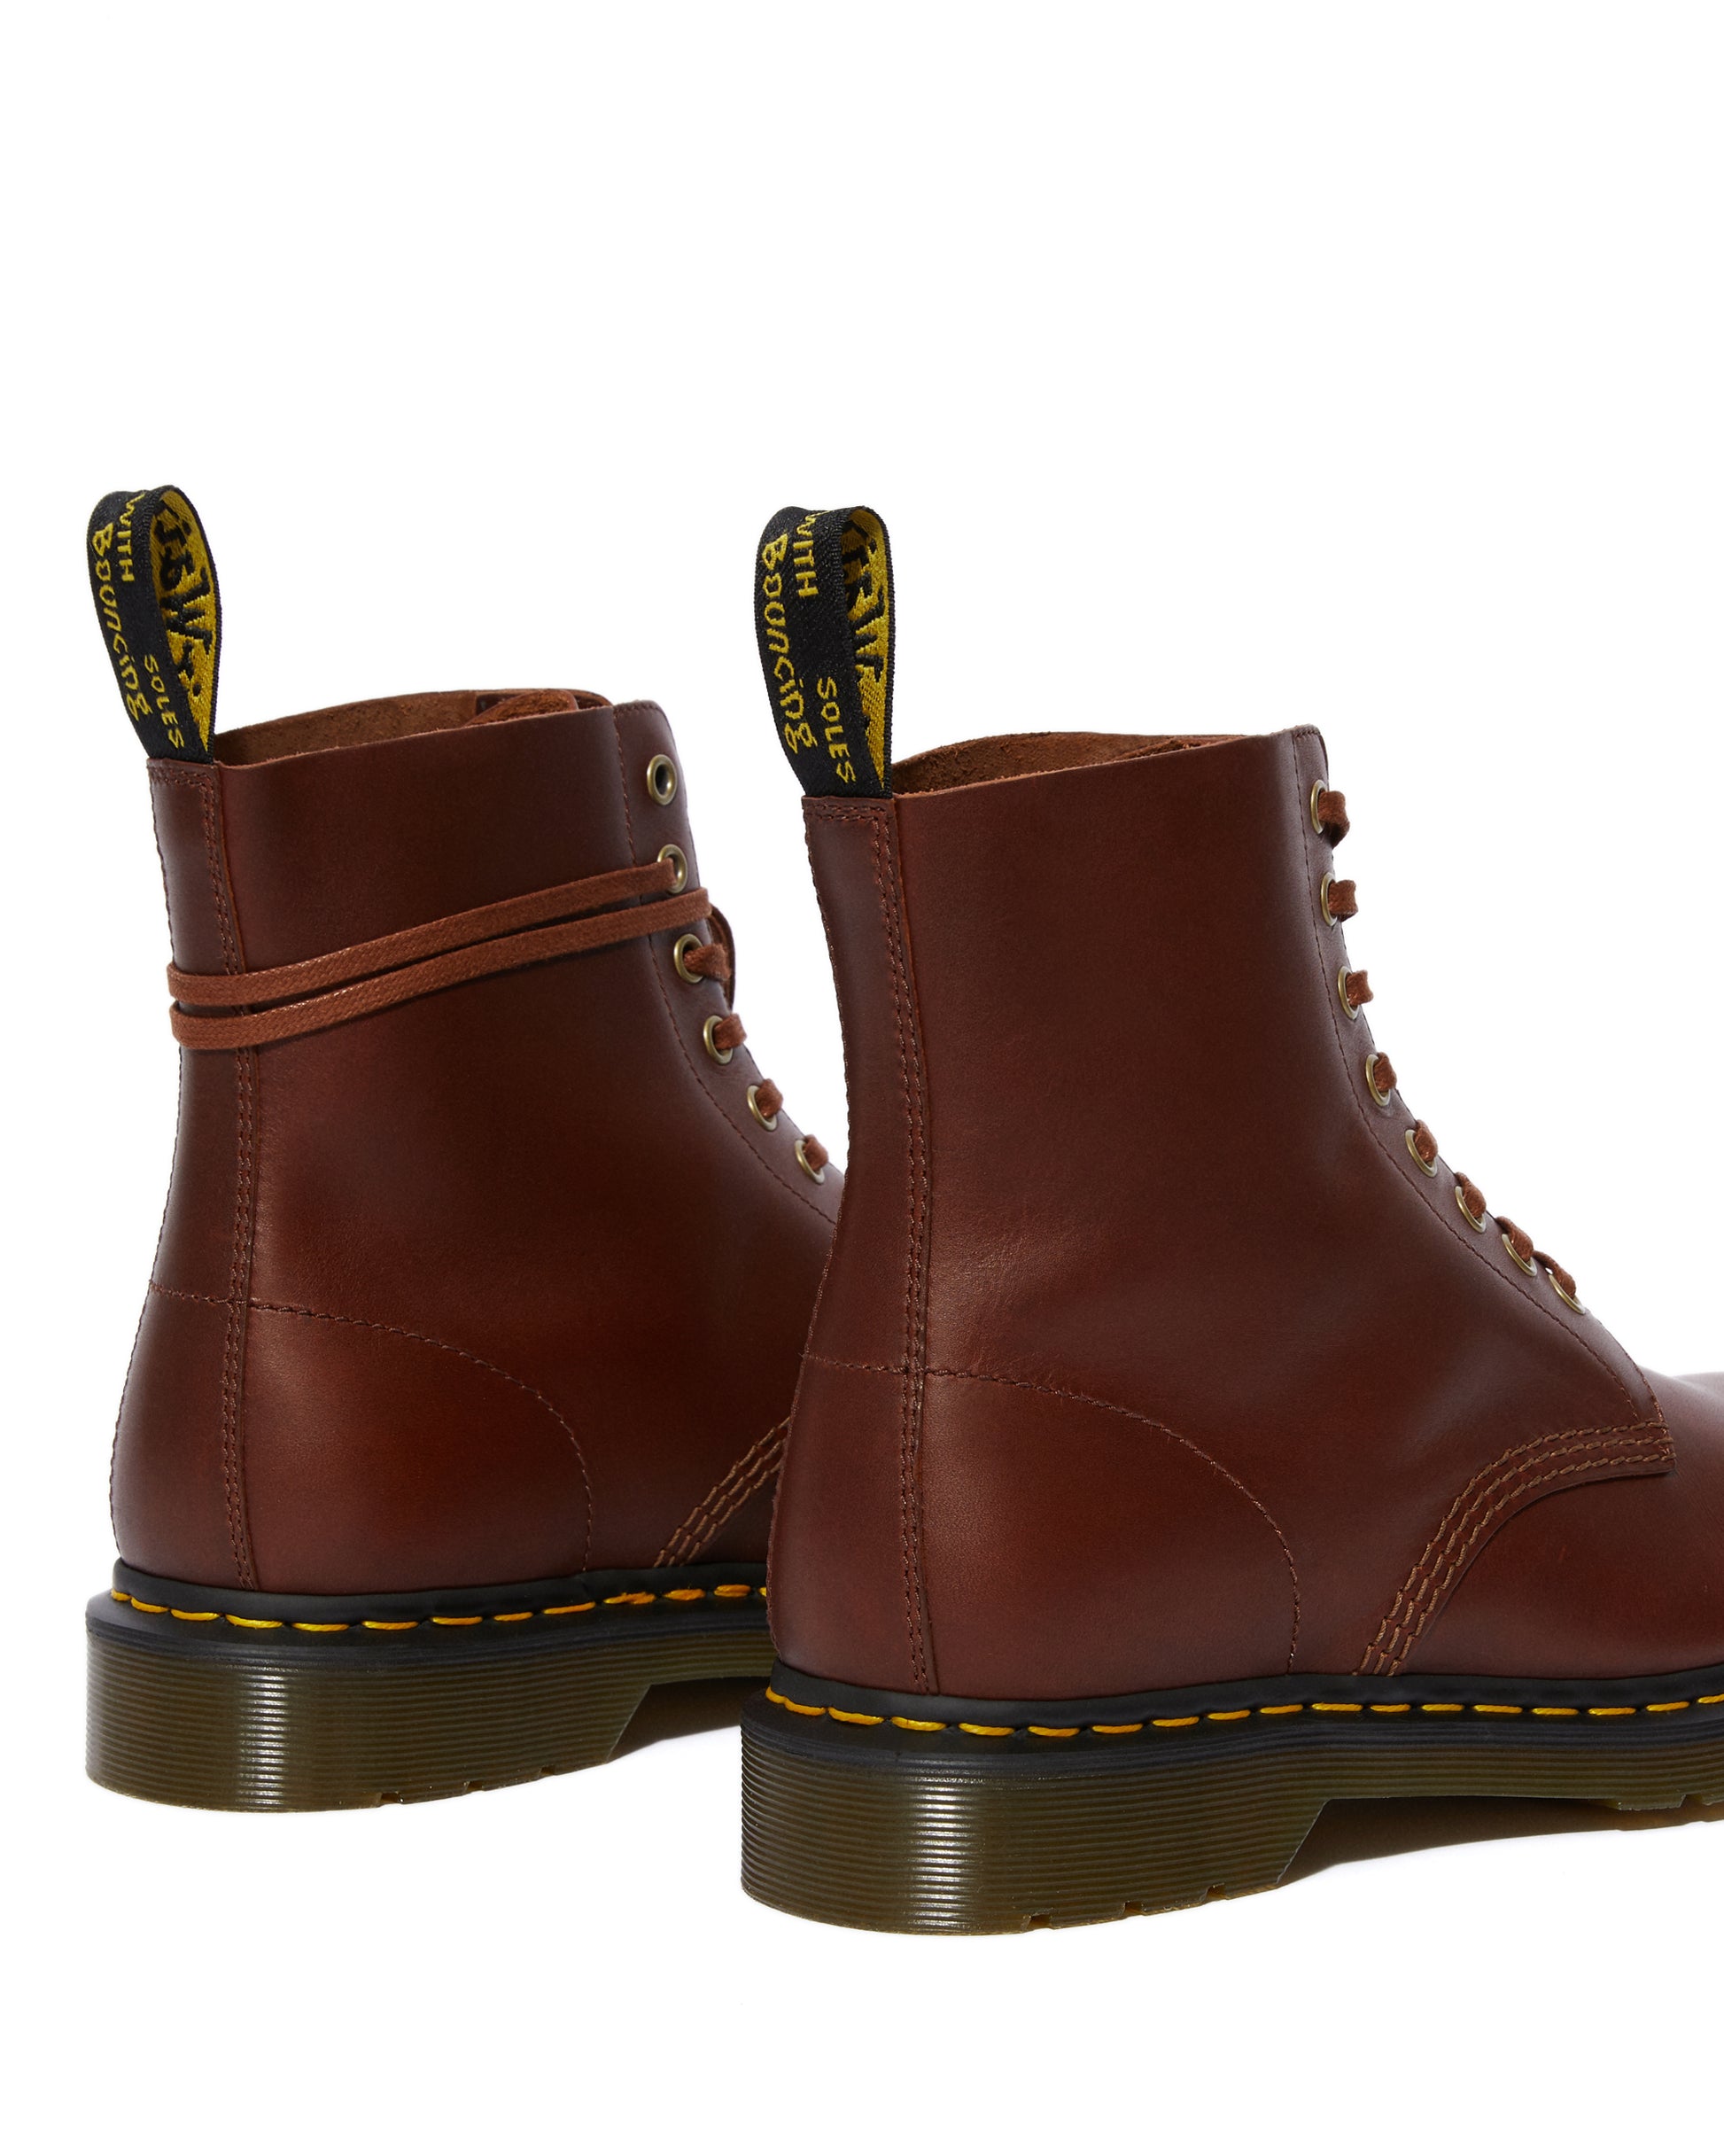 1460 PASCAL BROWN CLASSICO BOOT